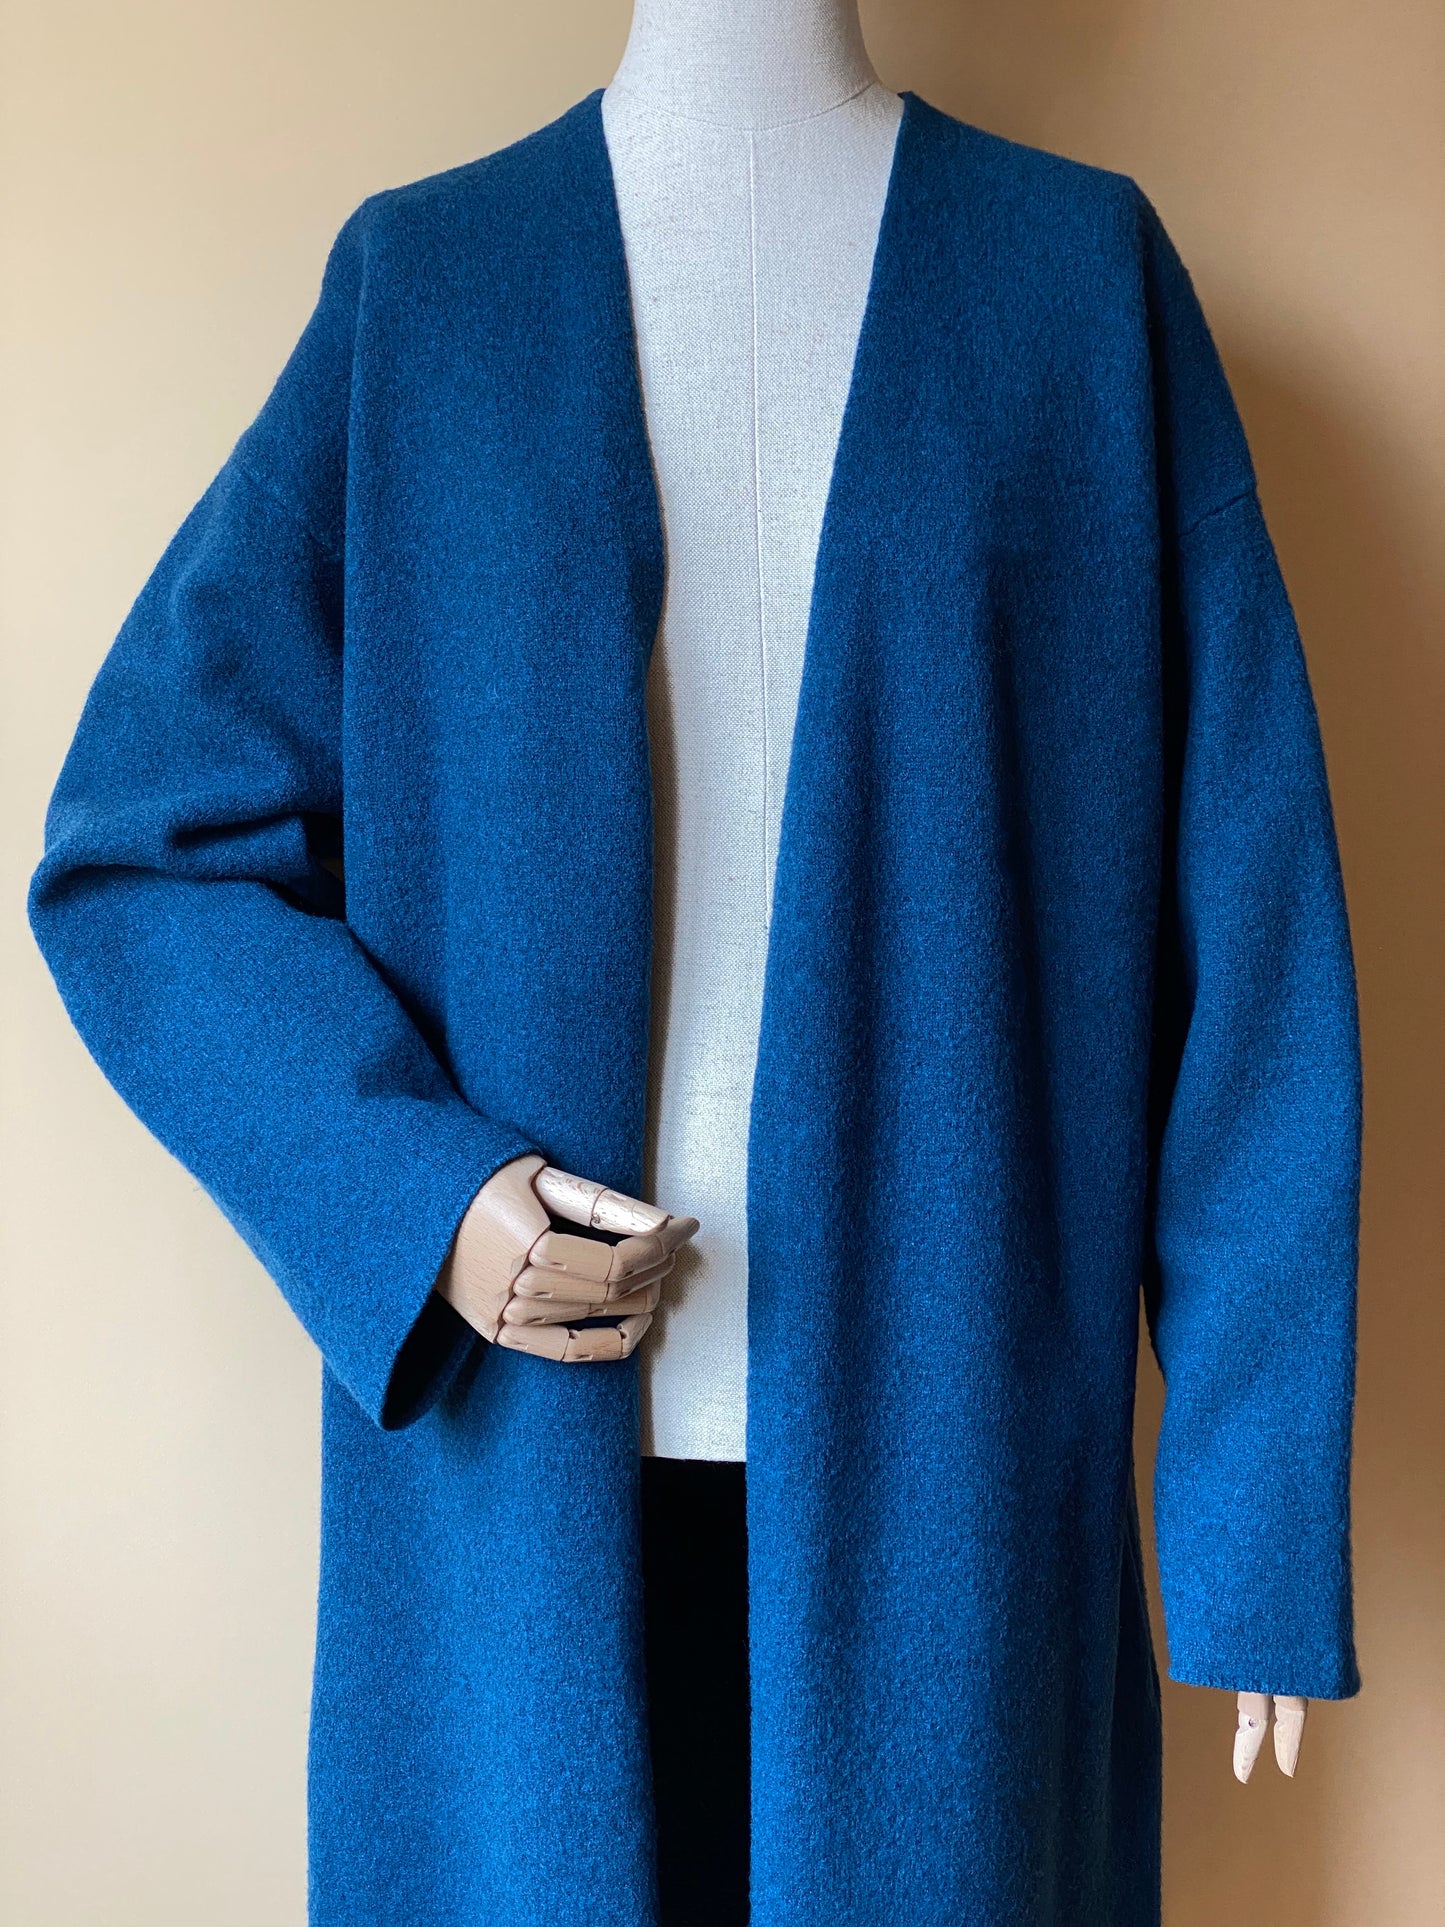 Teal Blue Long Belted Sweater